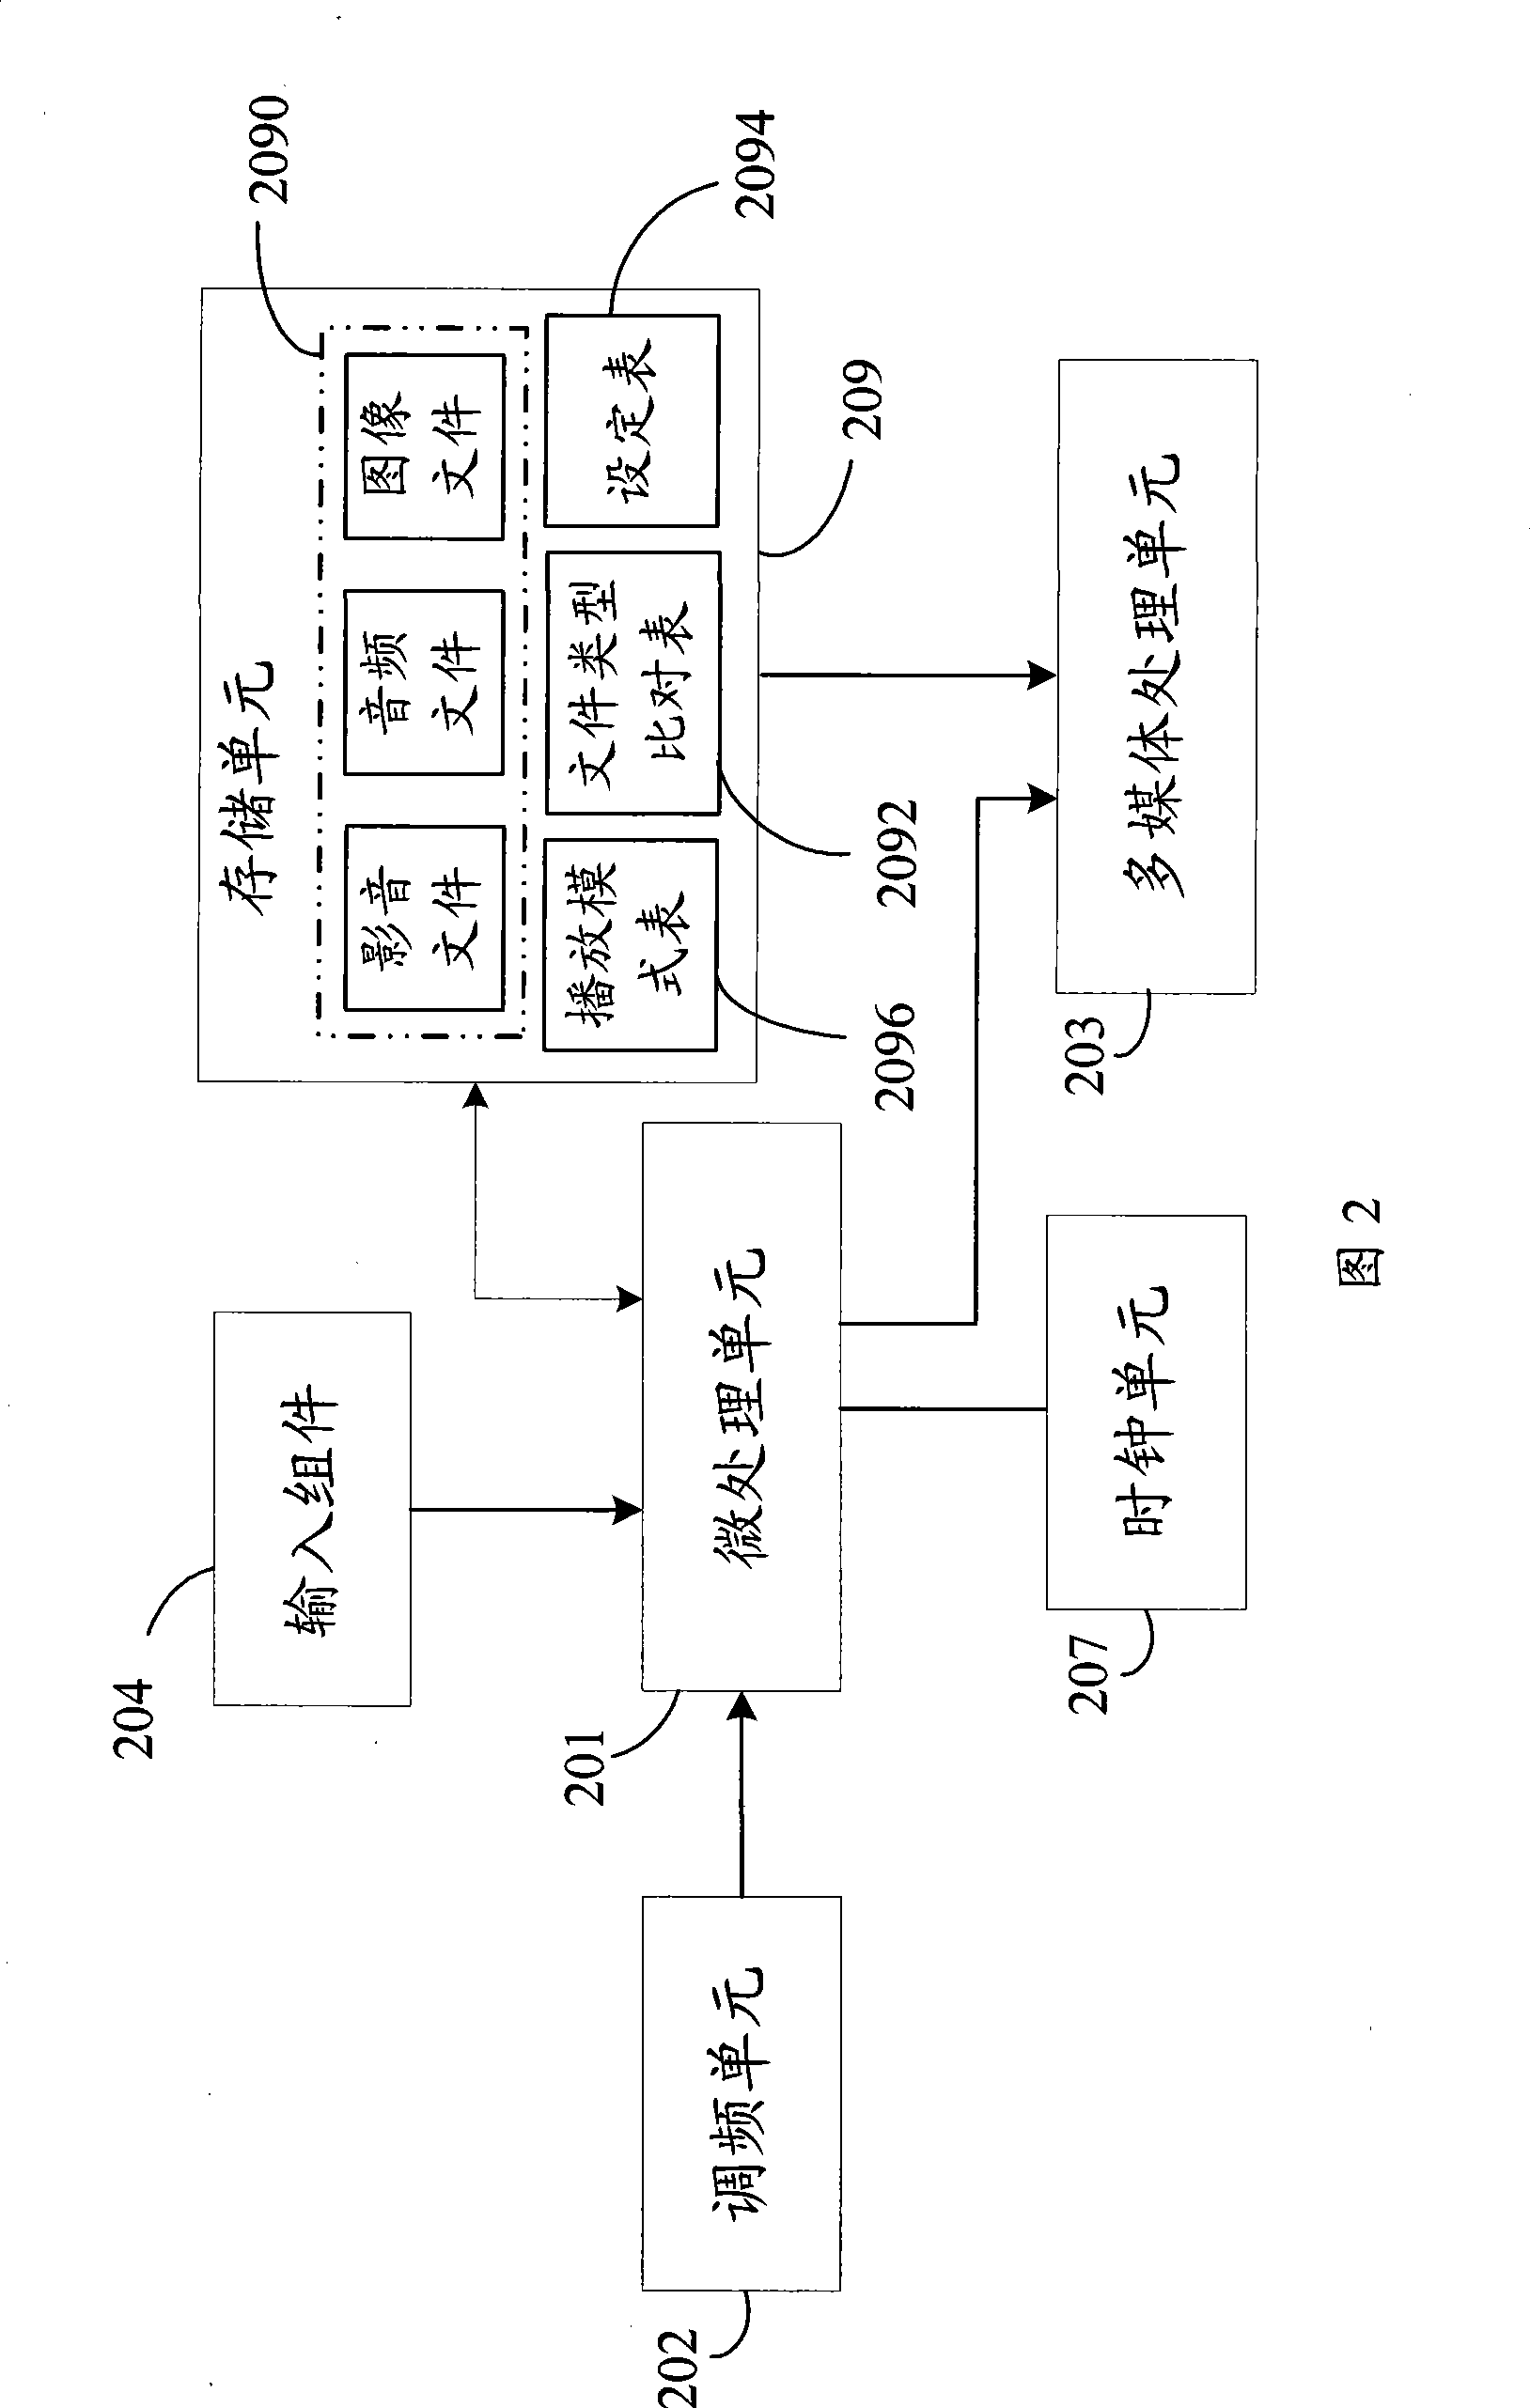 Electronic photo frame capable of automatically prompting menu options and method for setting menu options